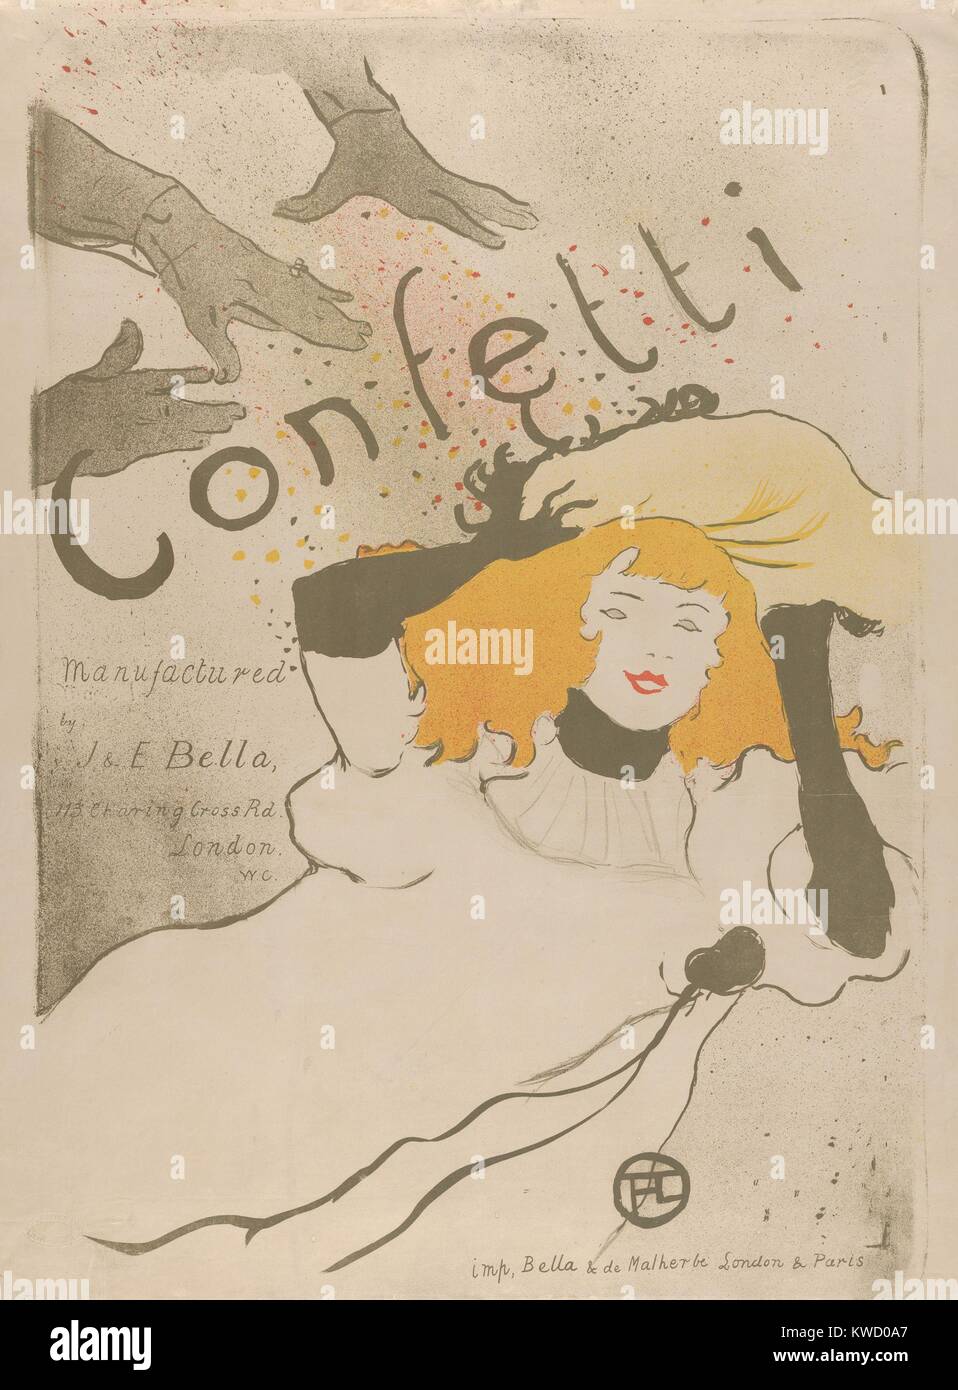 Confetti, by Henri de Toulouse-Lautrec, 1894, French Post-Impressionist, lithograph. This is an advertising poster for their paper confetti made by the Bella brothers in London, leading paper manufacturers. They were supporters of fine art posters (BSLOC 2017 5 74) Stock Photo